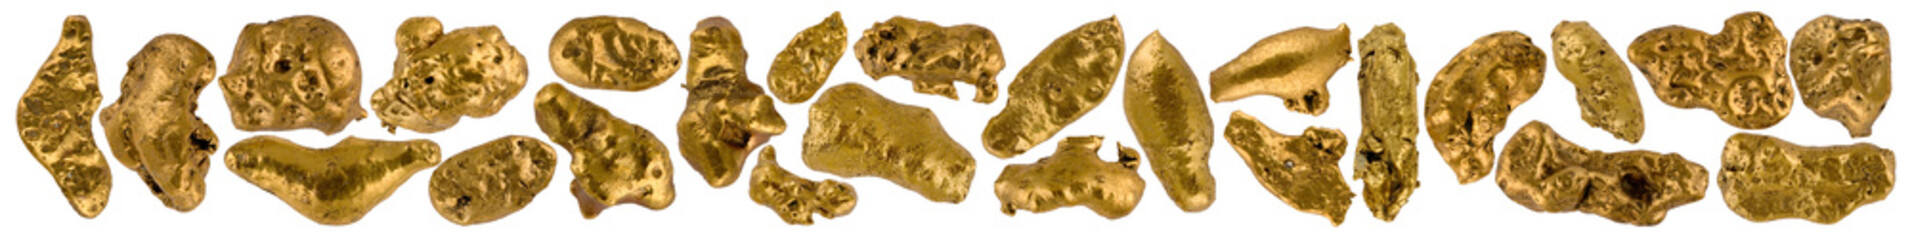 Gold nuggets on a white background